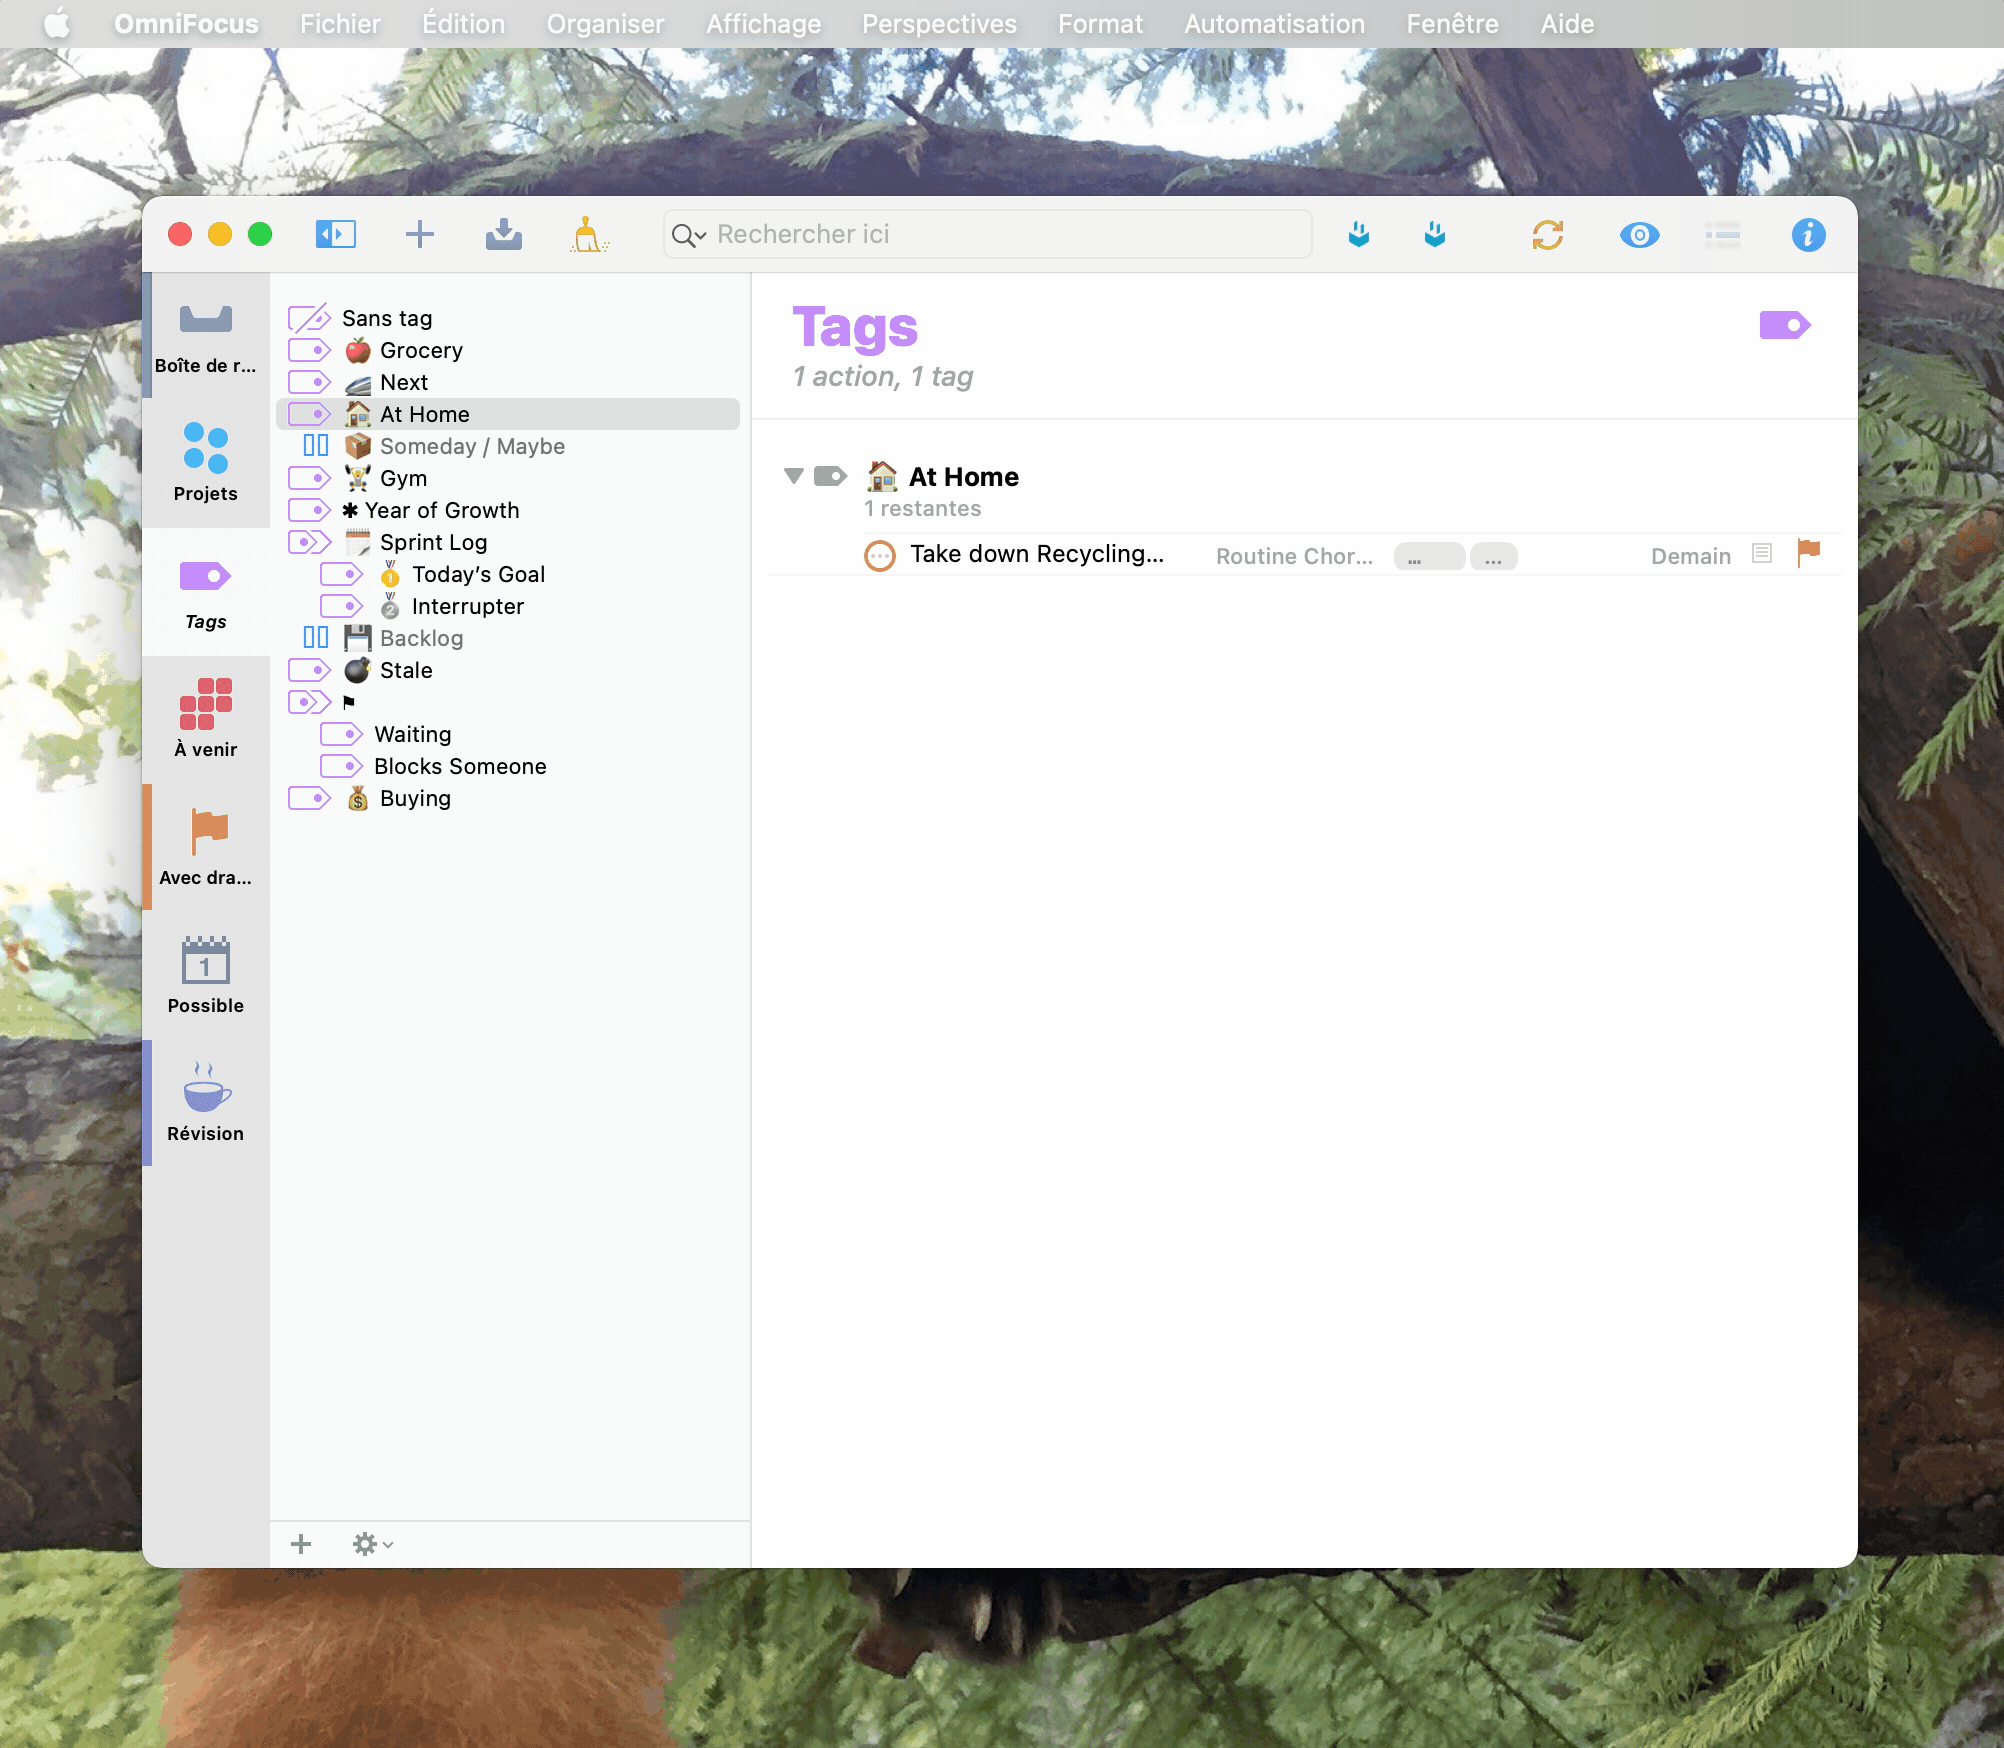 The plugins folder where you need to put the plugin bundle is easy to find! Go to Automation in the menu bar, then Plugins, then Show In Finder. This is where to drop the omnijs bundle.